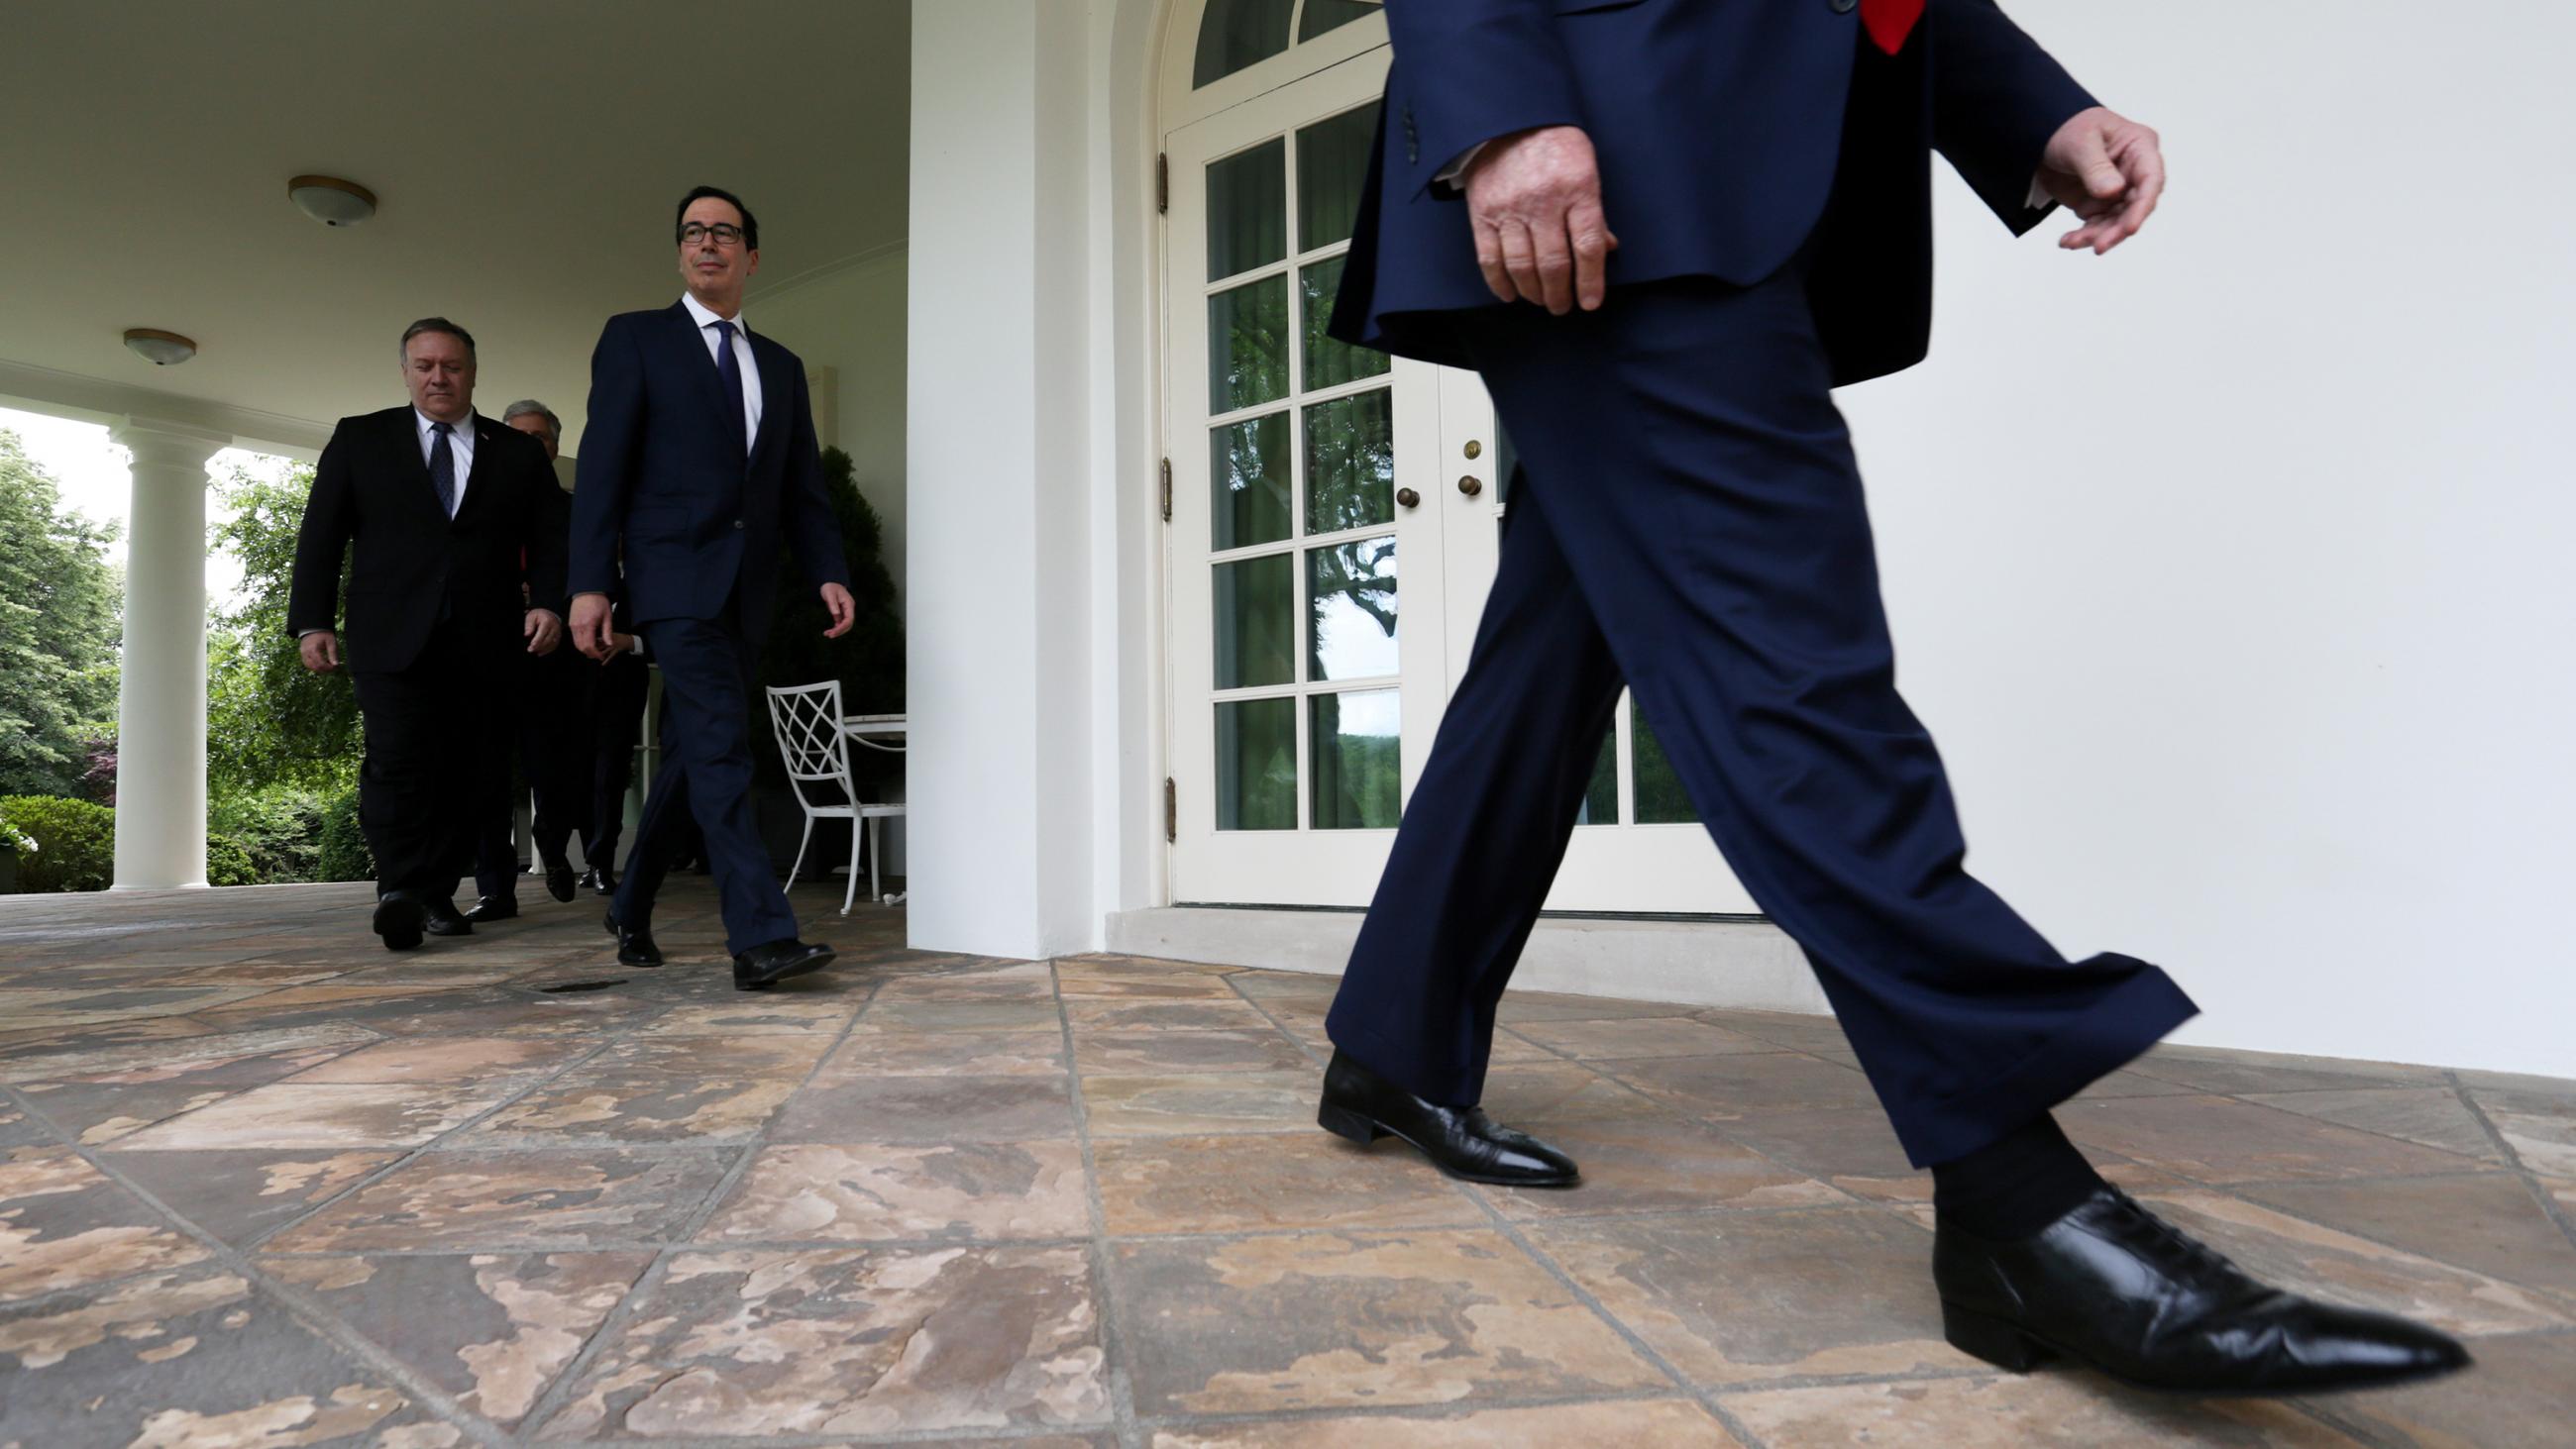 The photo shows the lower portion of the president walking past the camera with Treasury Secretary Steven Mnuchin and Secretary of State Mike Pompeo following close behind. 